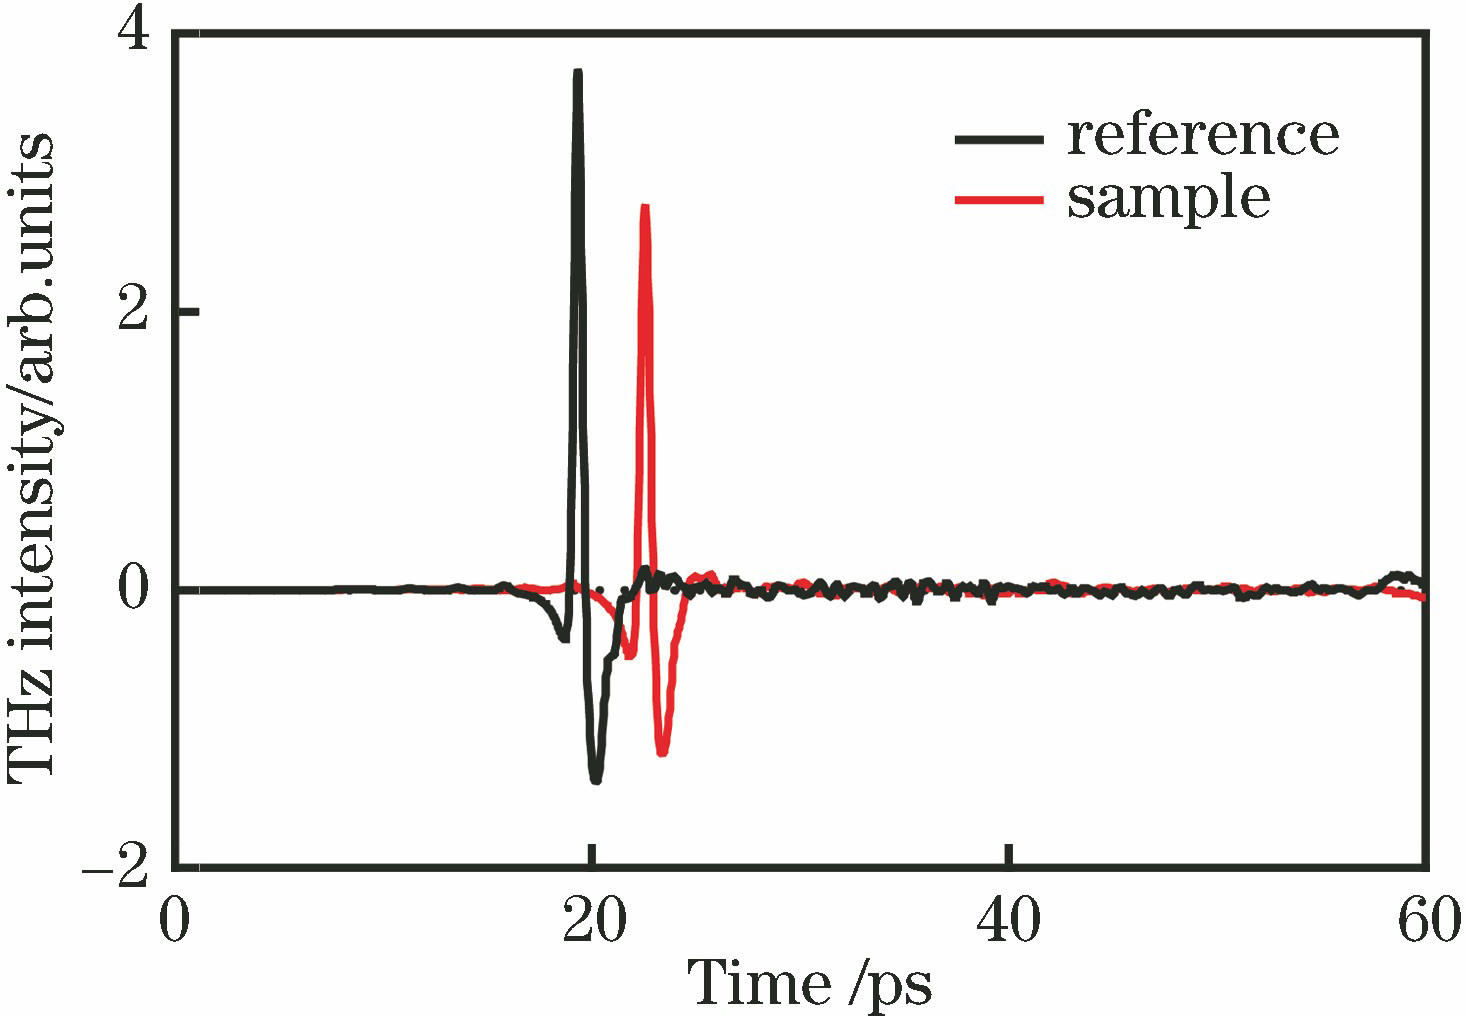 Waveforms of THz pulse before and after passing through sample